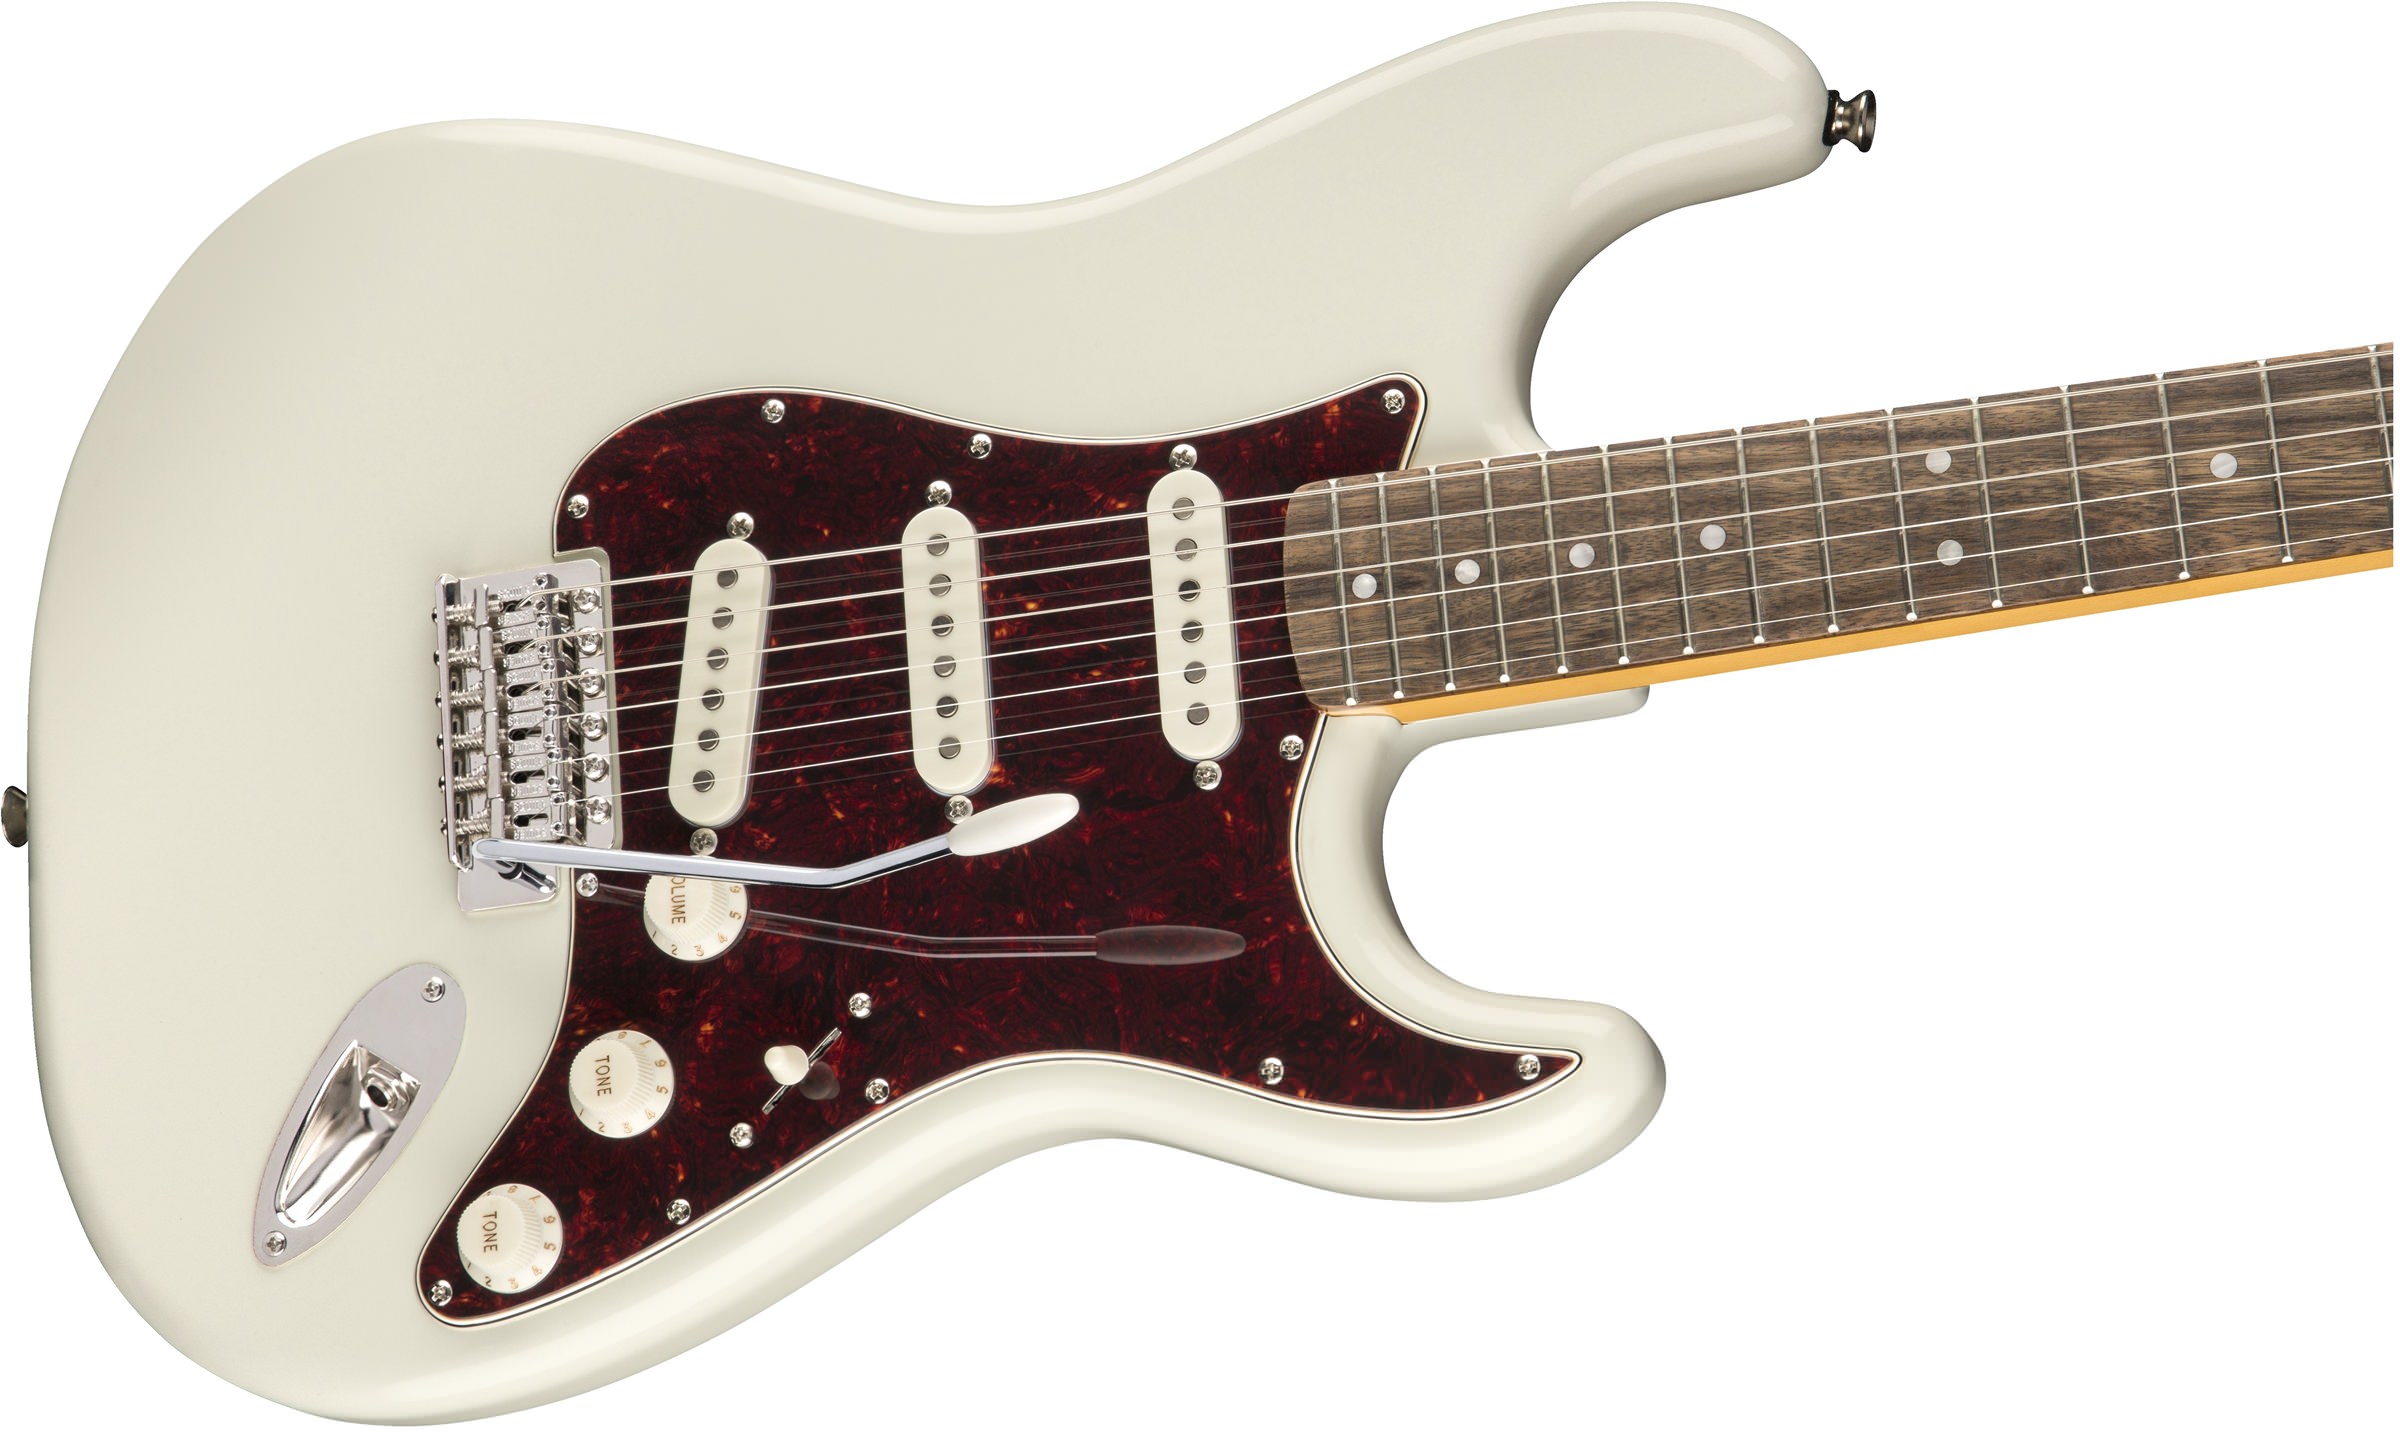 Электрогитара hss. Squier Classic Vibe 70s Stratocaster. Fender Stratocaster Olympic White. Электрогитара Fender Squier Stratocaster. Электрогитара Fender Squier Affinity Stratocaster.